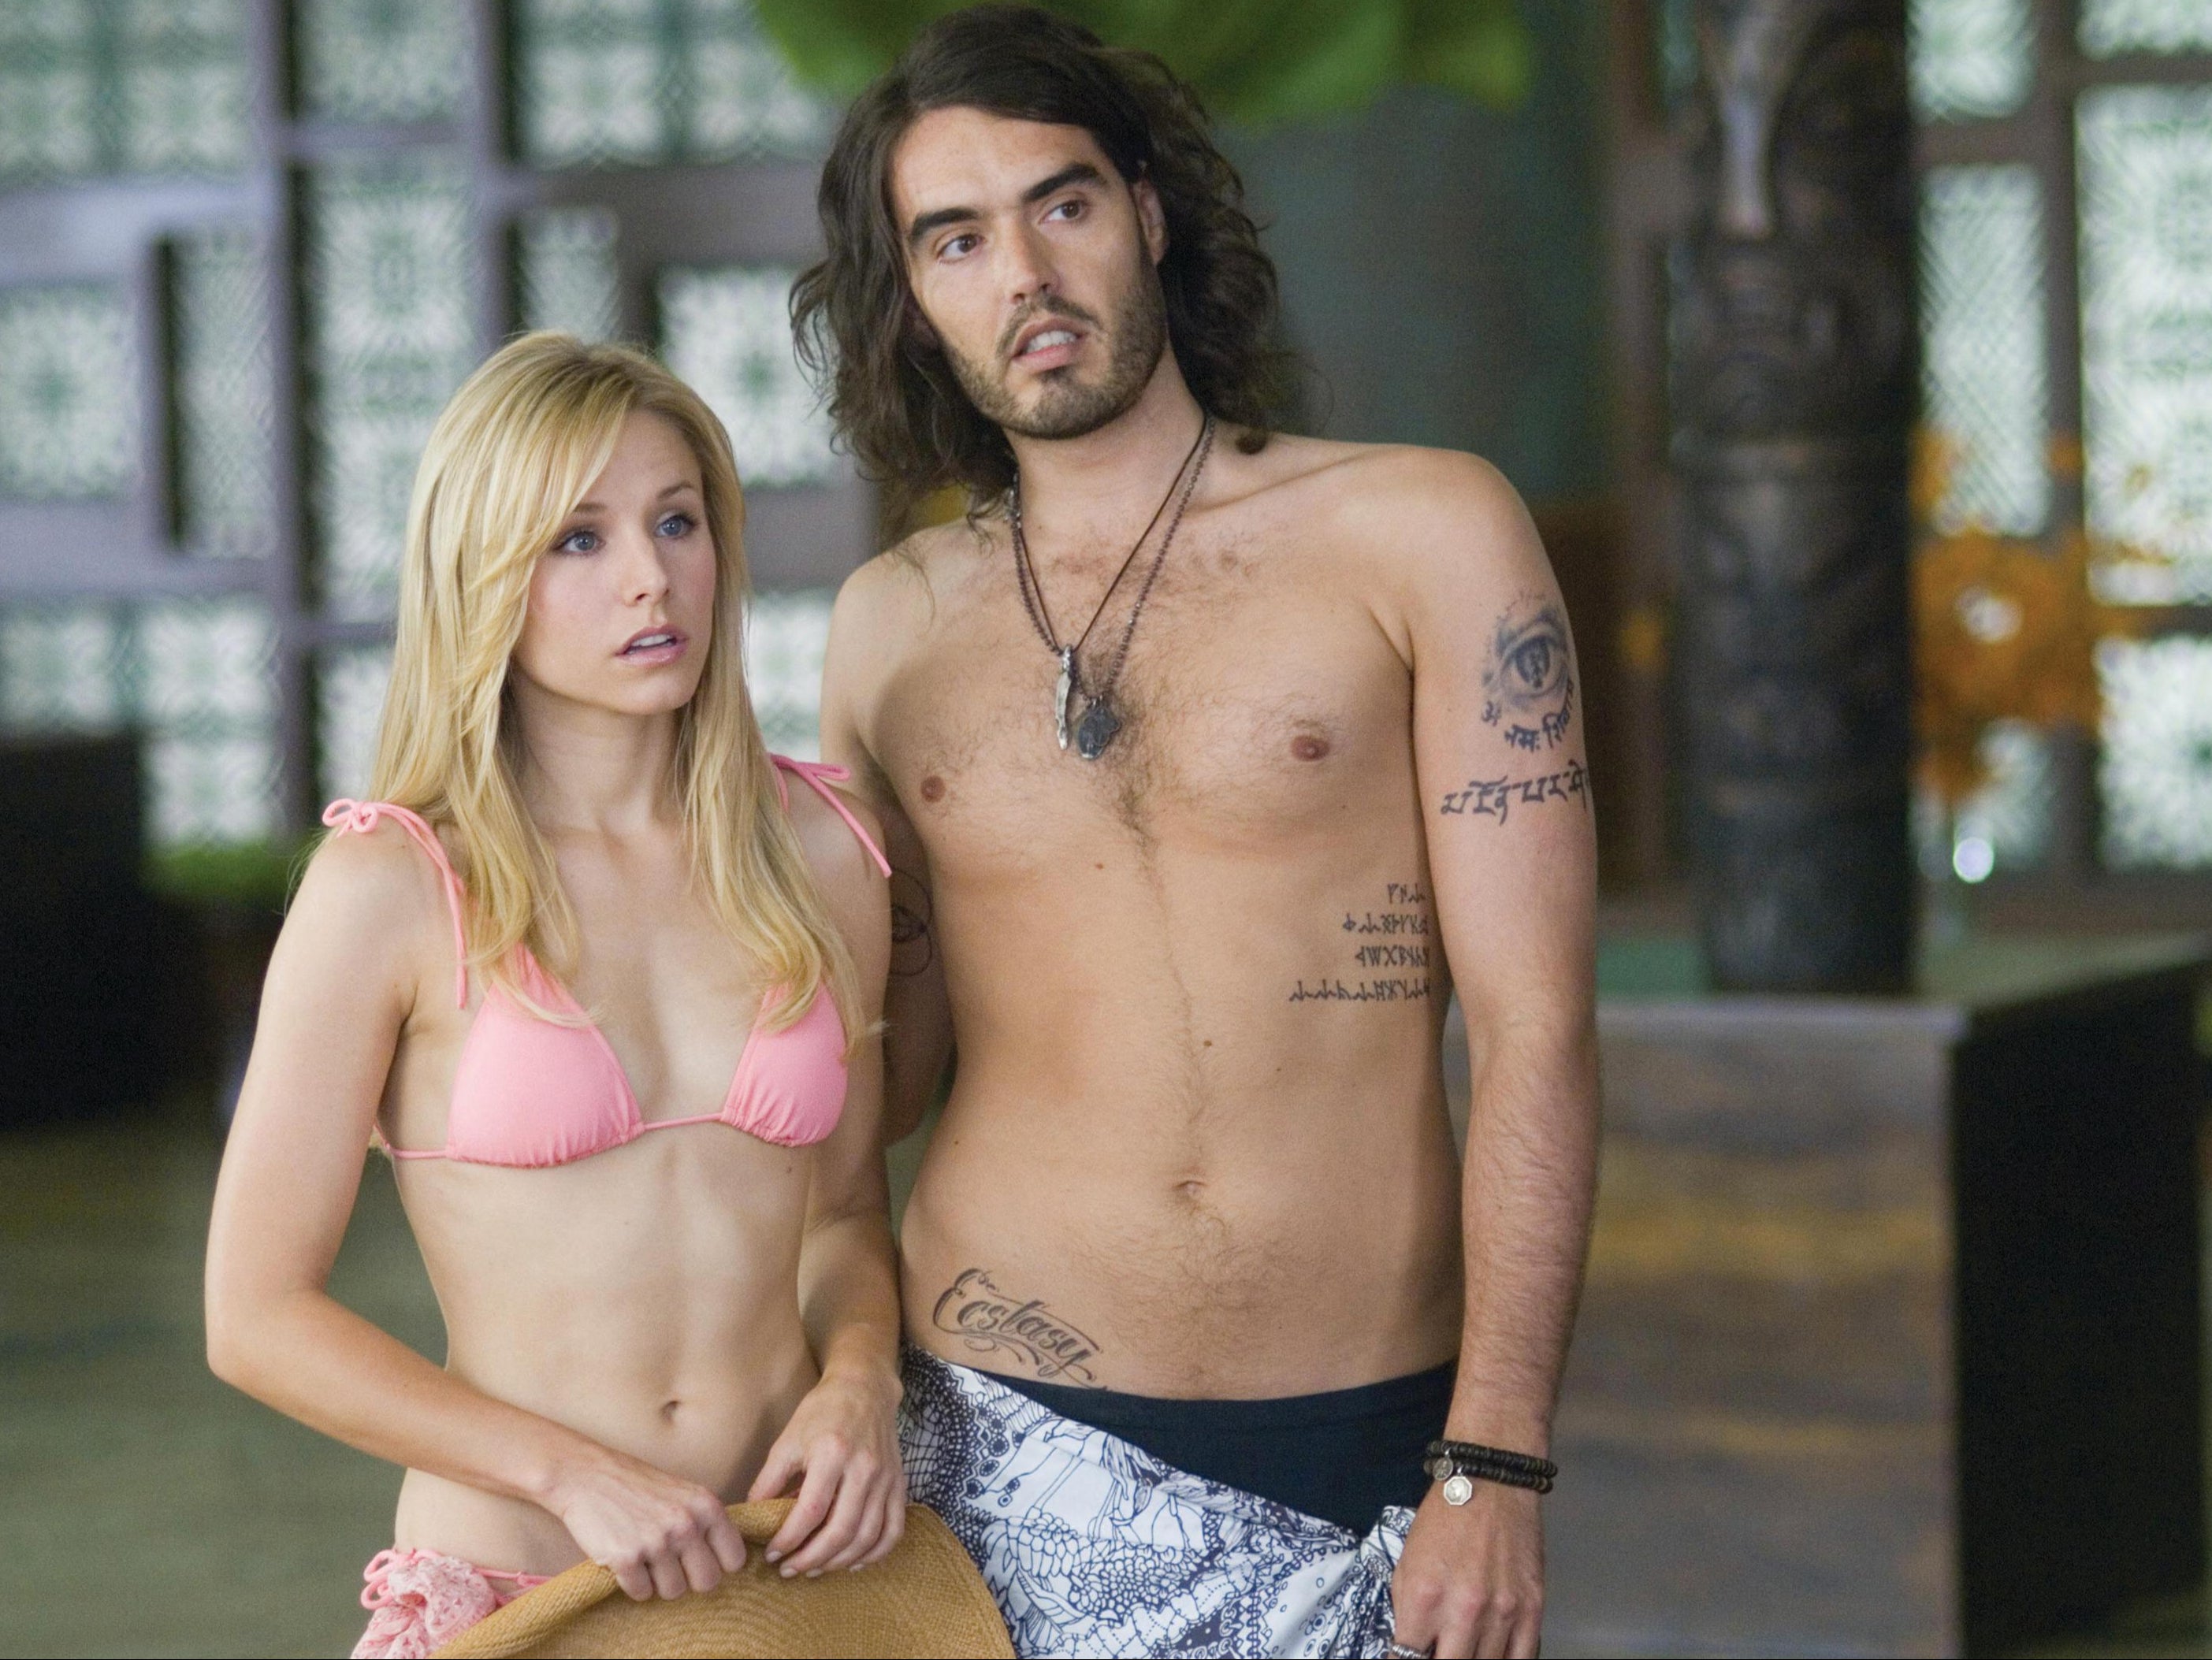 Kristen Bell and Russell Brand in a scene from the film Forgetting Sarah Marshall